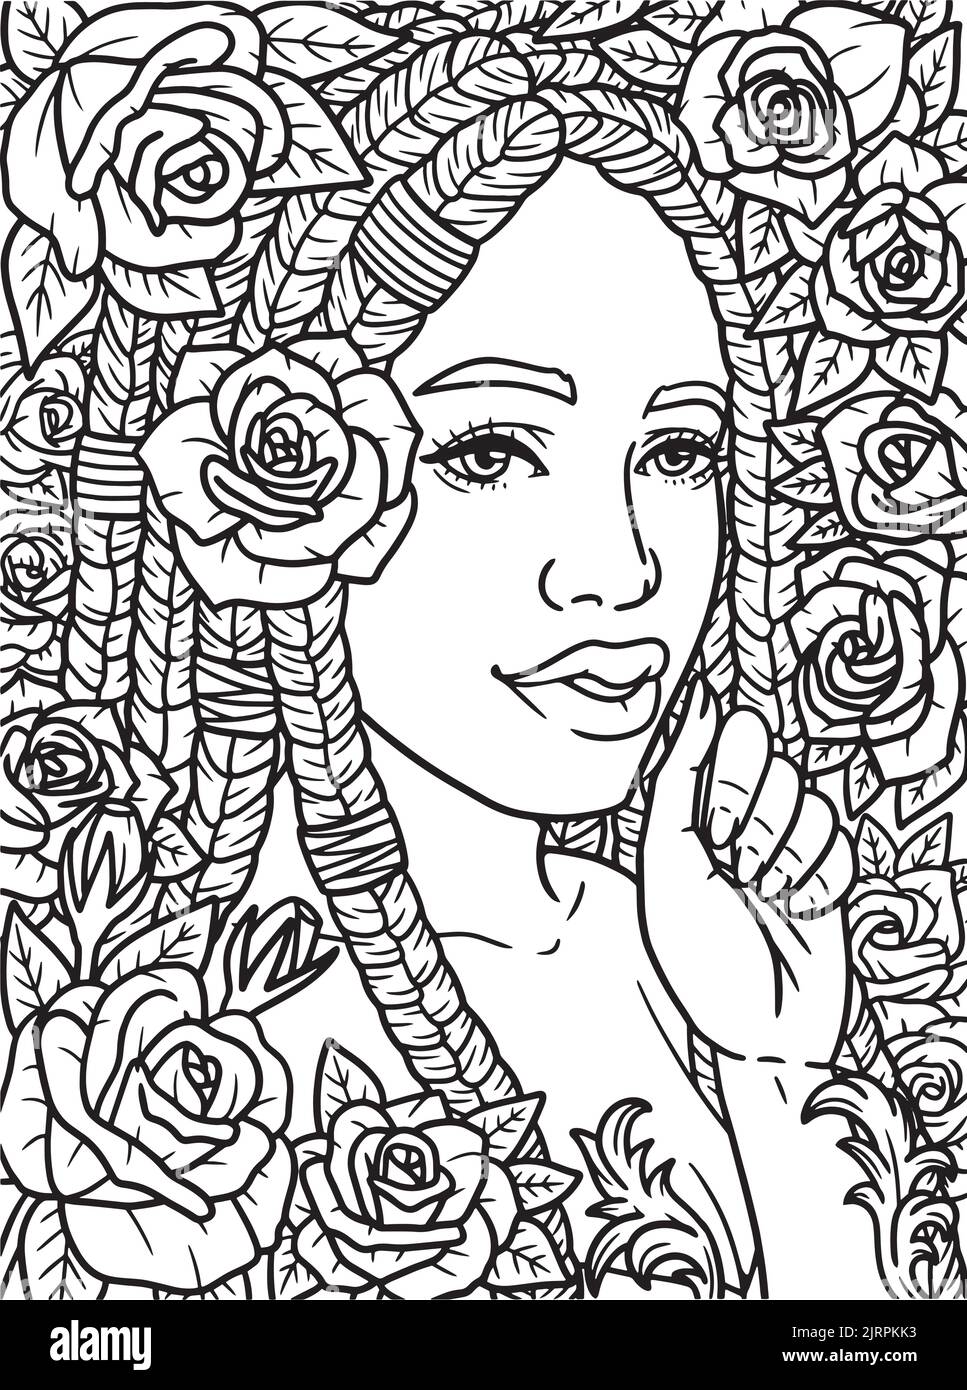 Afro American Girl With Rose Coloring Page Stock Vector